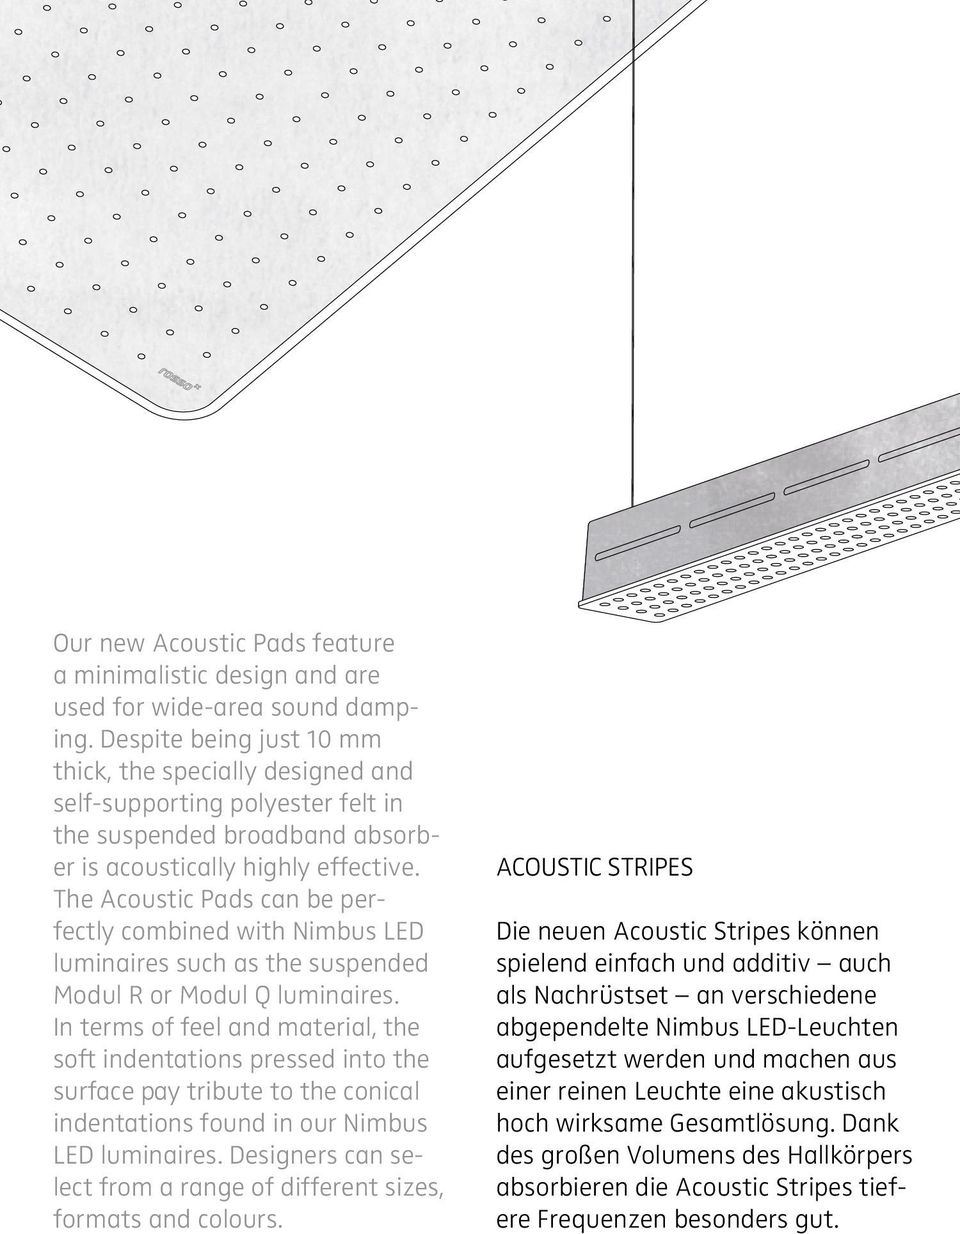 The Acoustic Pads can be perfectly combined with Nimbus LED luminaires such as the suspended Modul R or Modul Q luminaires.